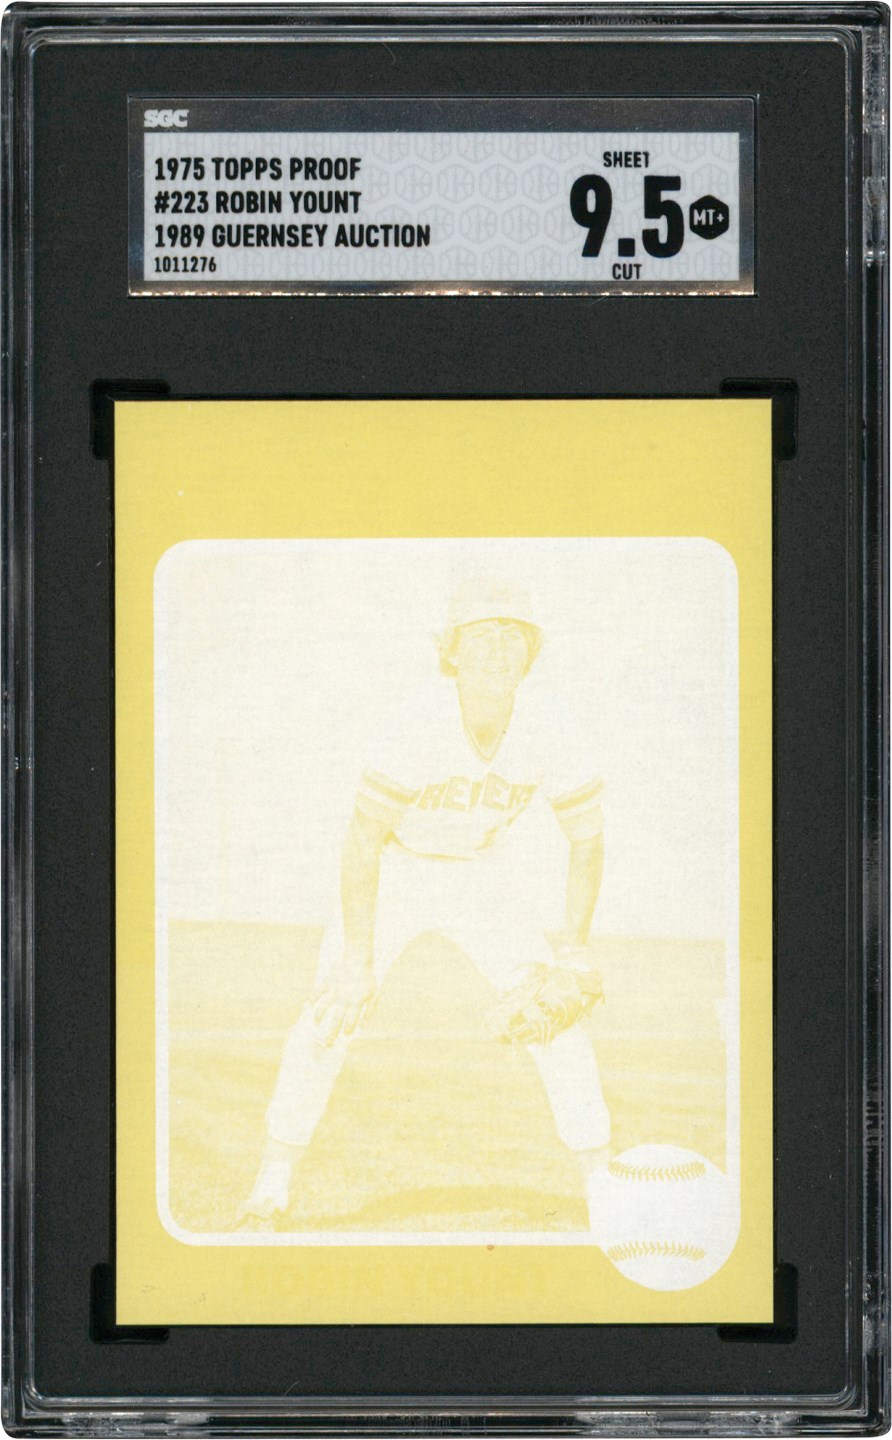 - 1975 Topps Yellow Proof #223 Robin Yount Rookie Card "1/1" SGC MINT+ 9.5 (ex-1989 Guernsey Auction)